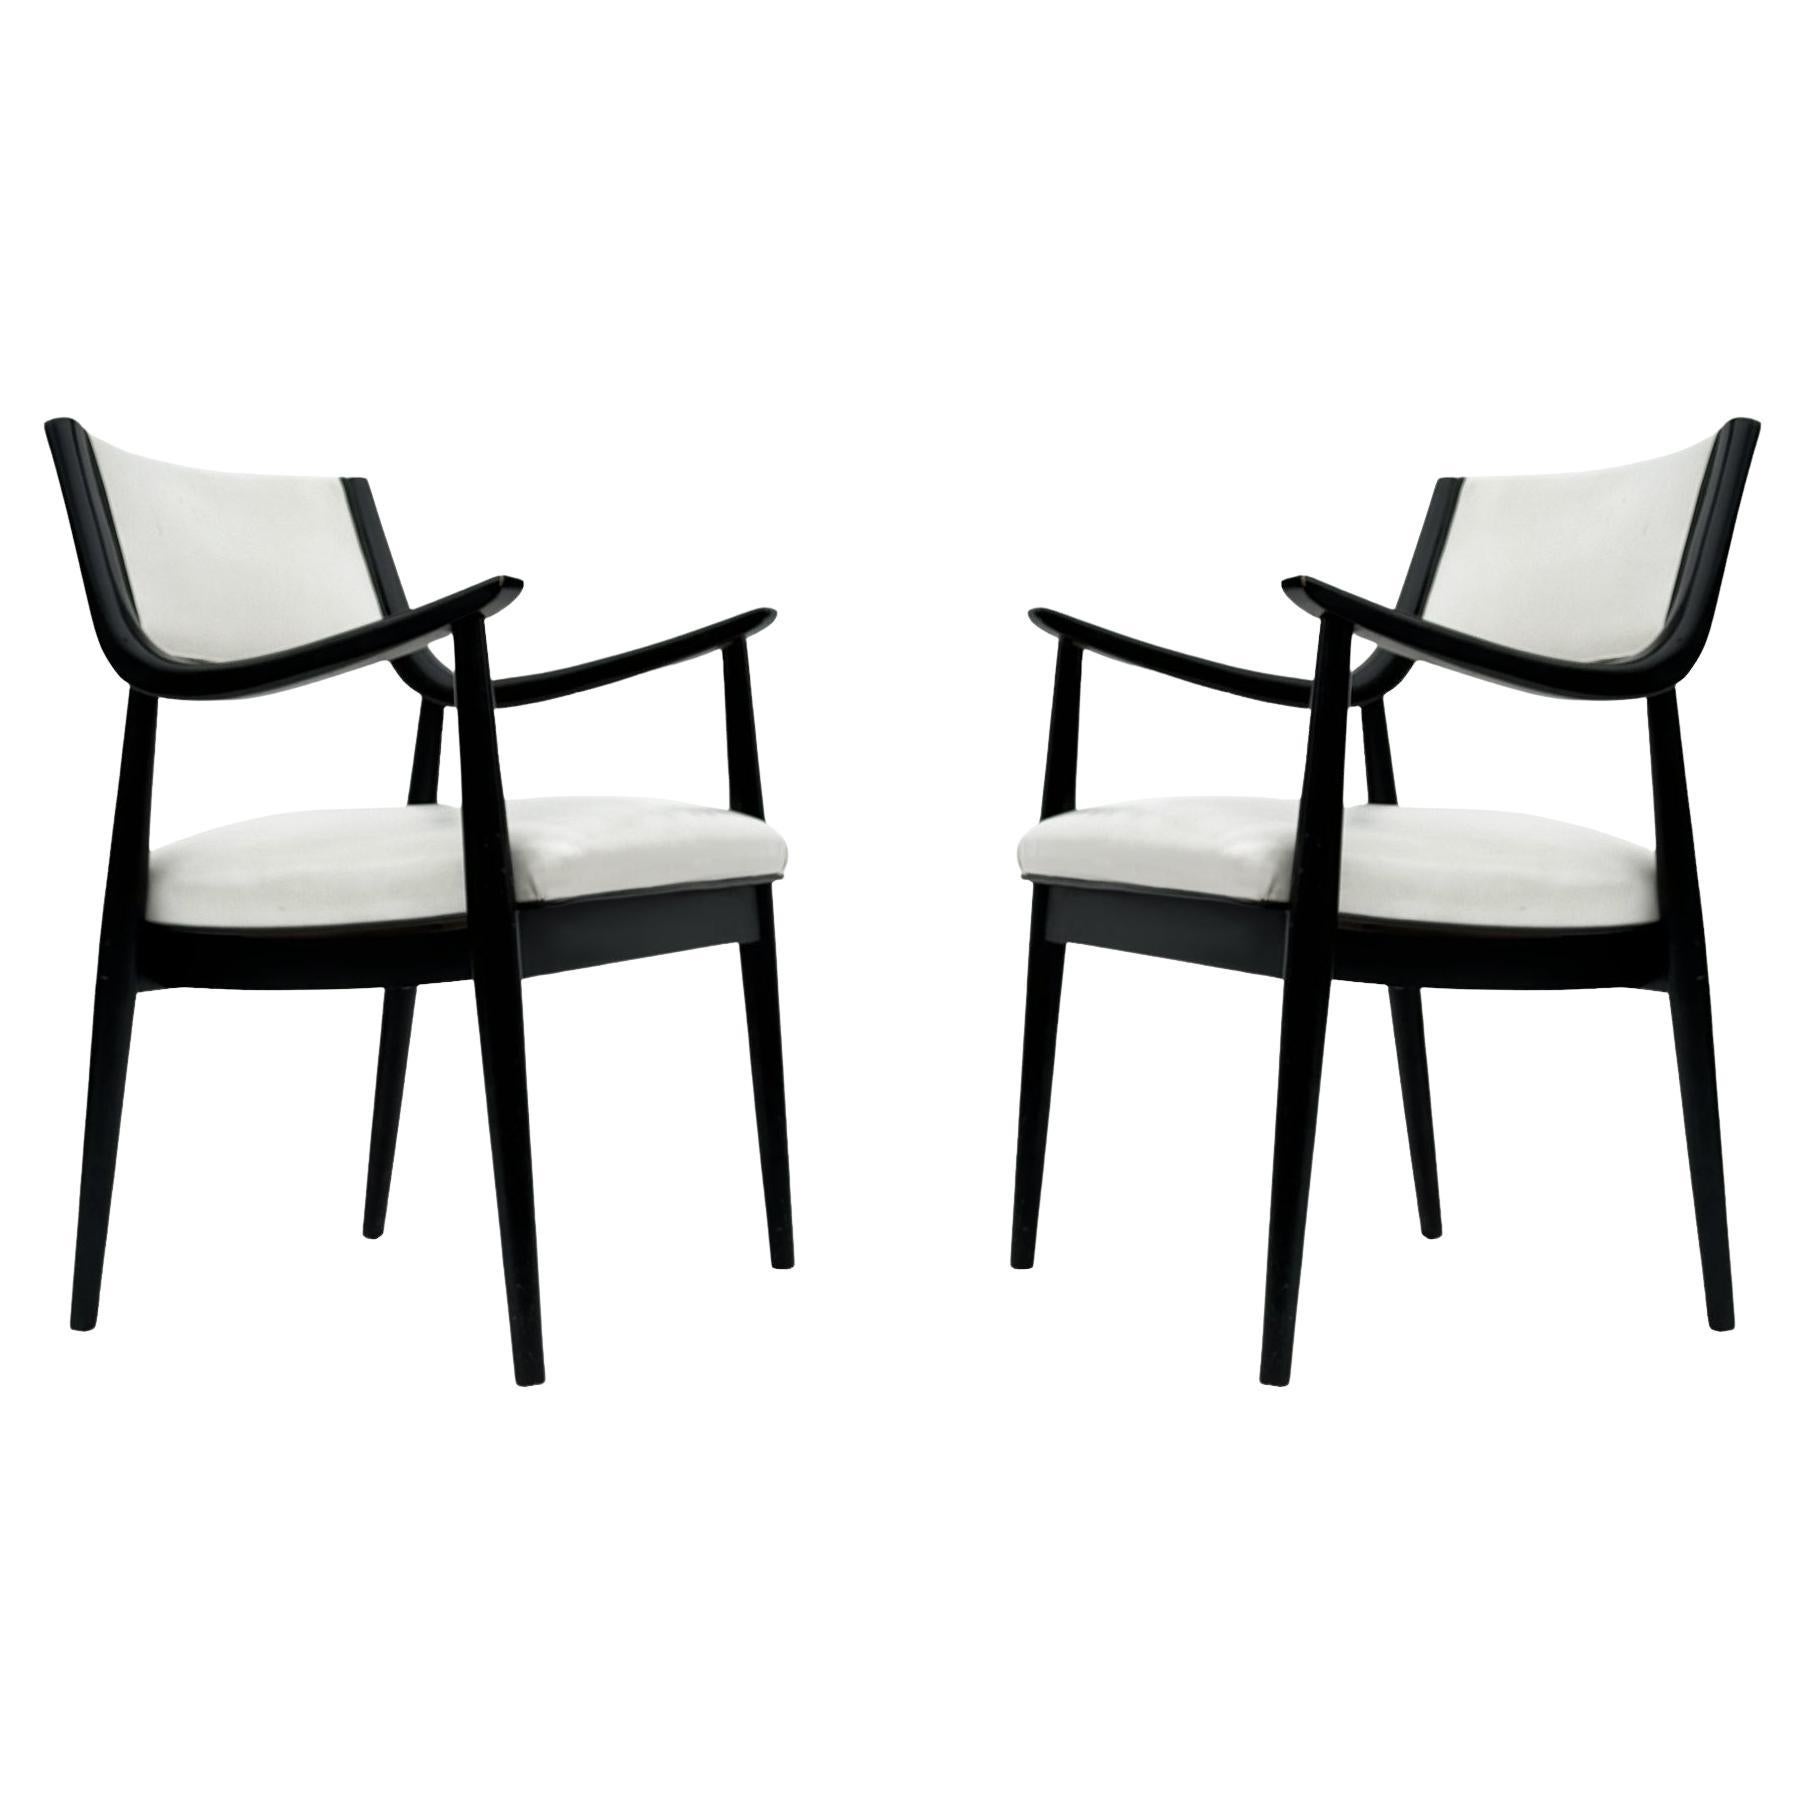 Pair of Mid-Century Modern Black Lacquer Danish Modern Style Armchairs in White For Sale